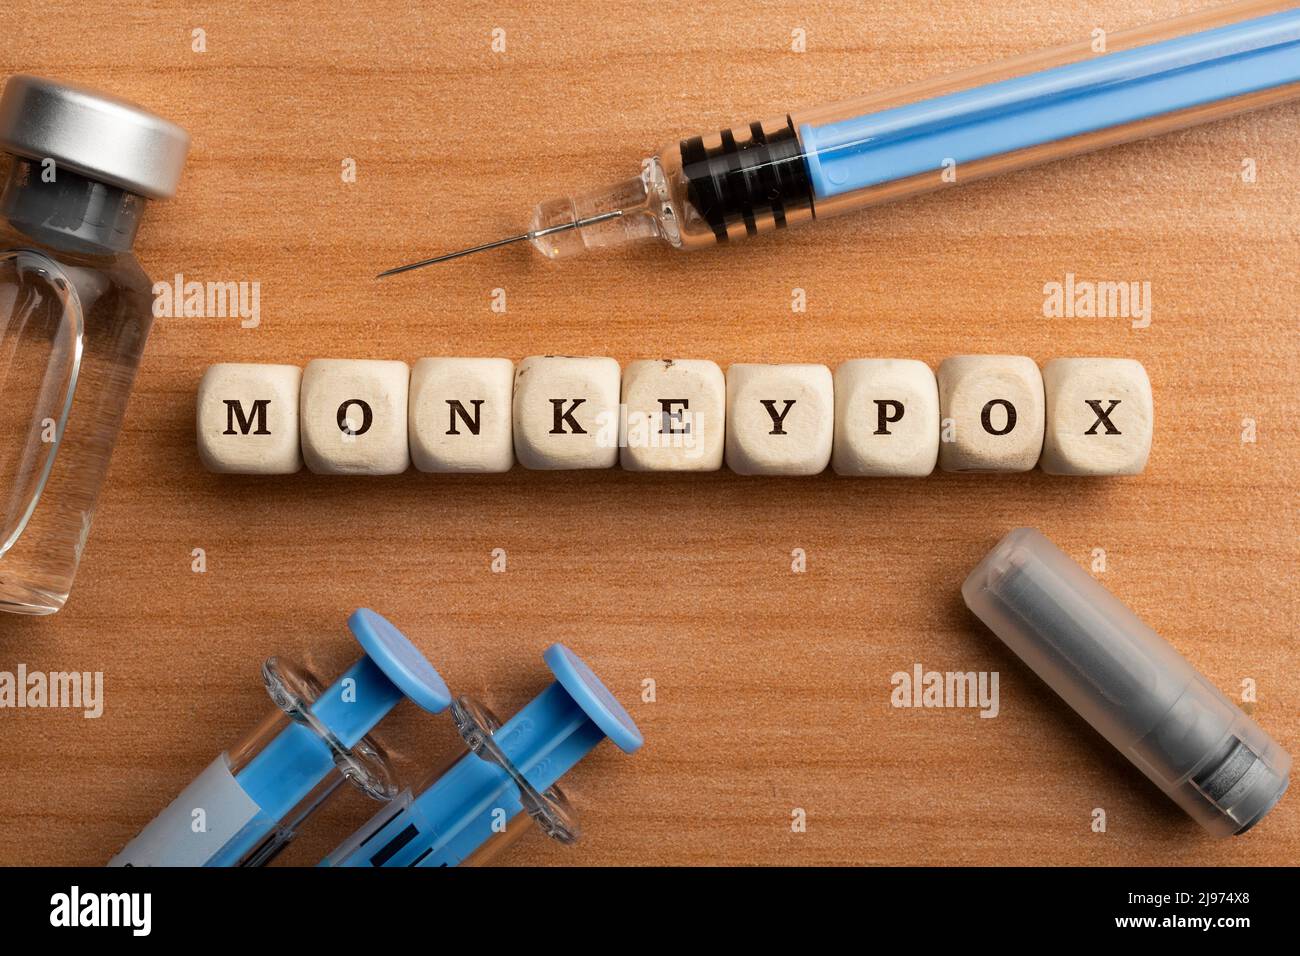 Monkeypox pandemic concept: dice surrounded by syringes and vials make up the word monkeypox Stock Photo